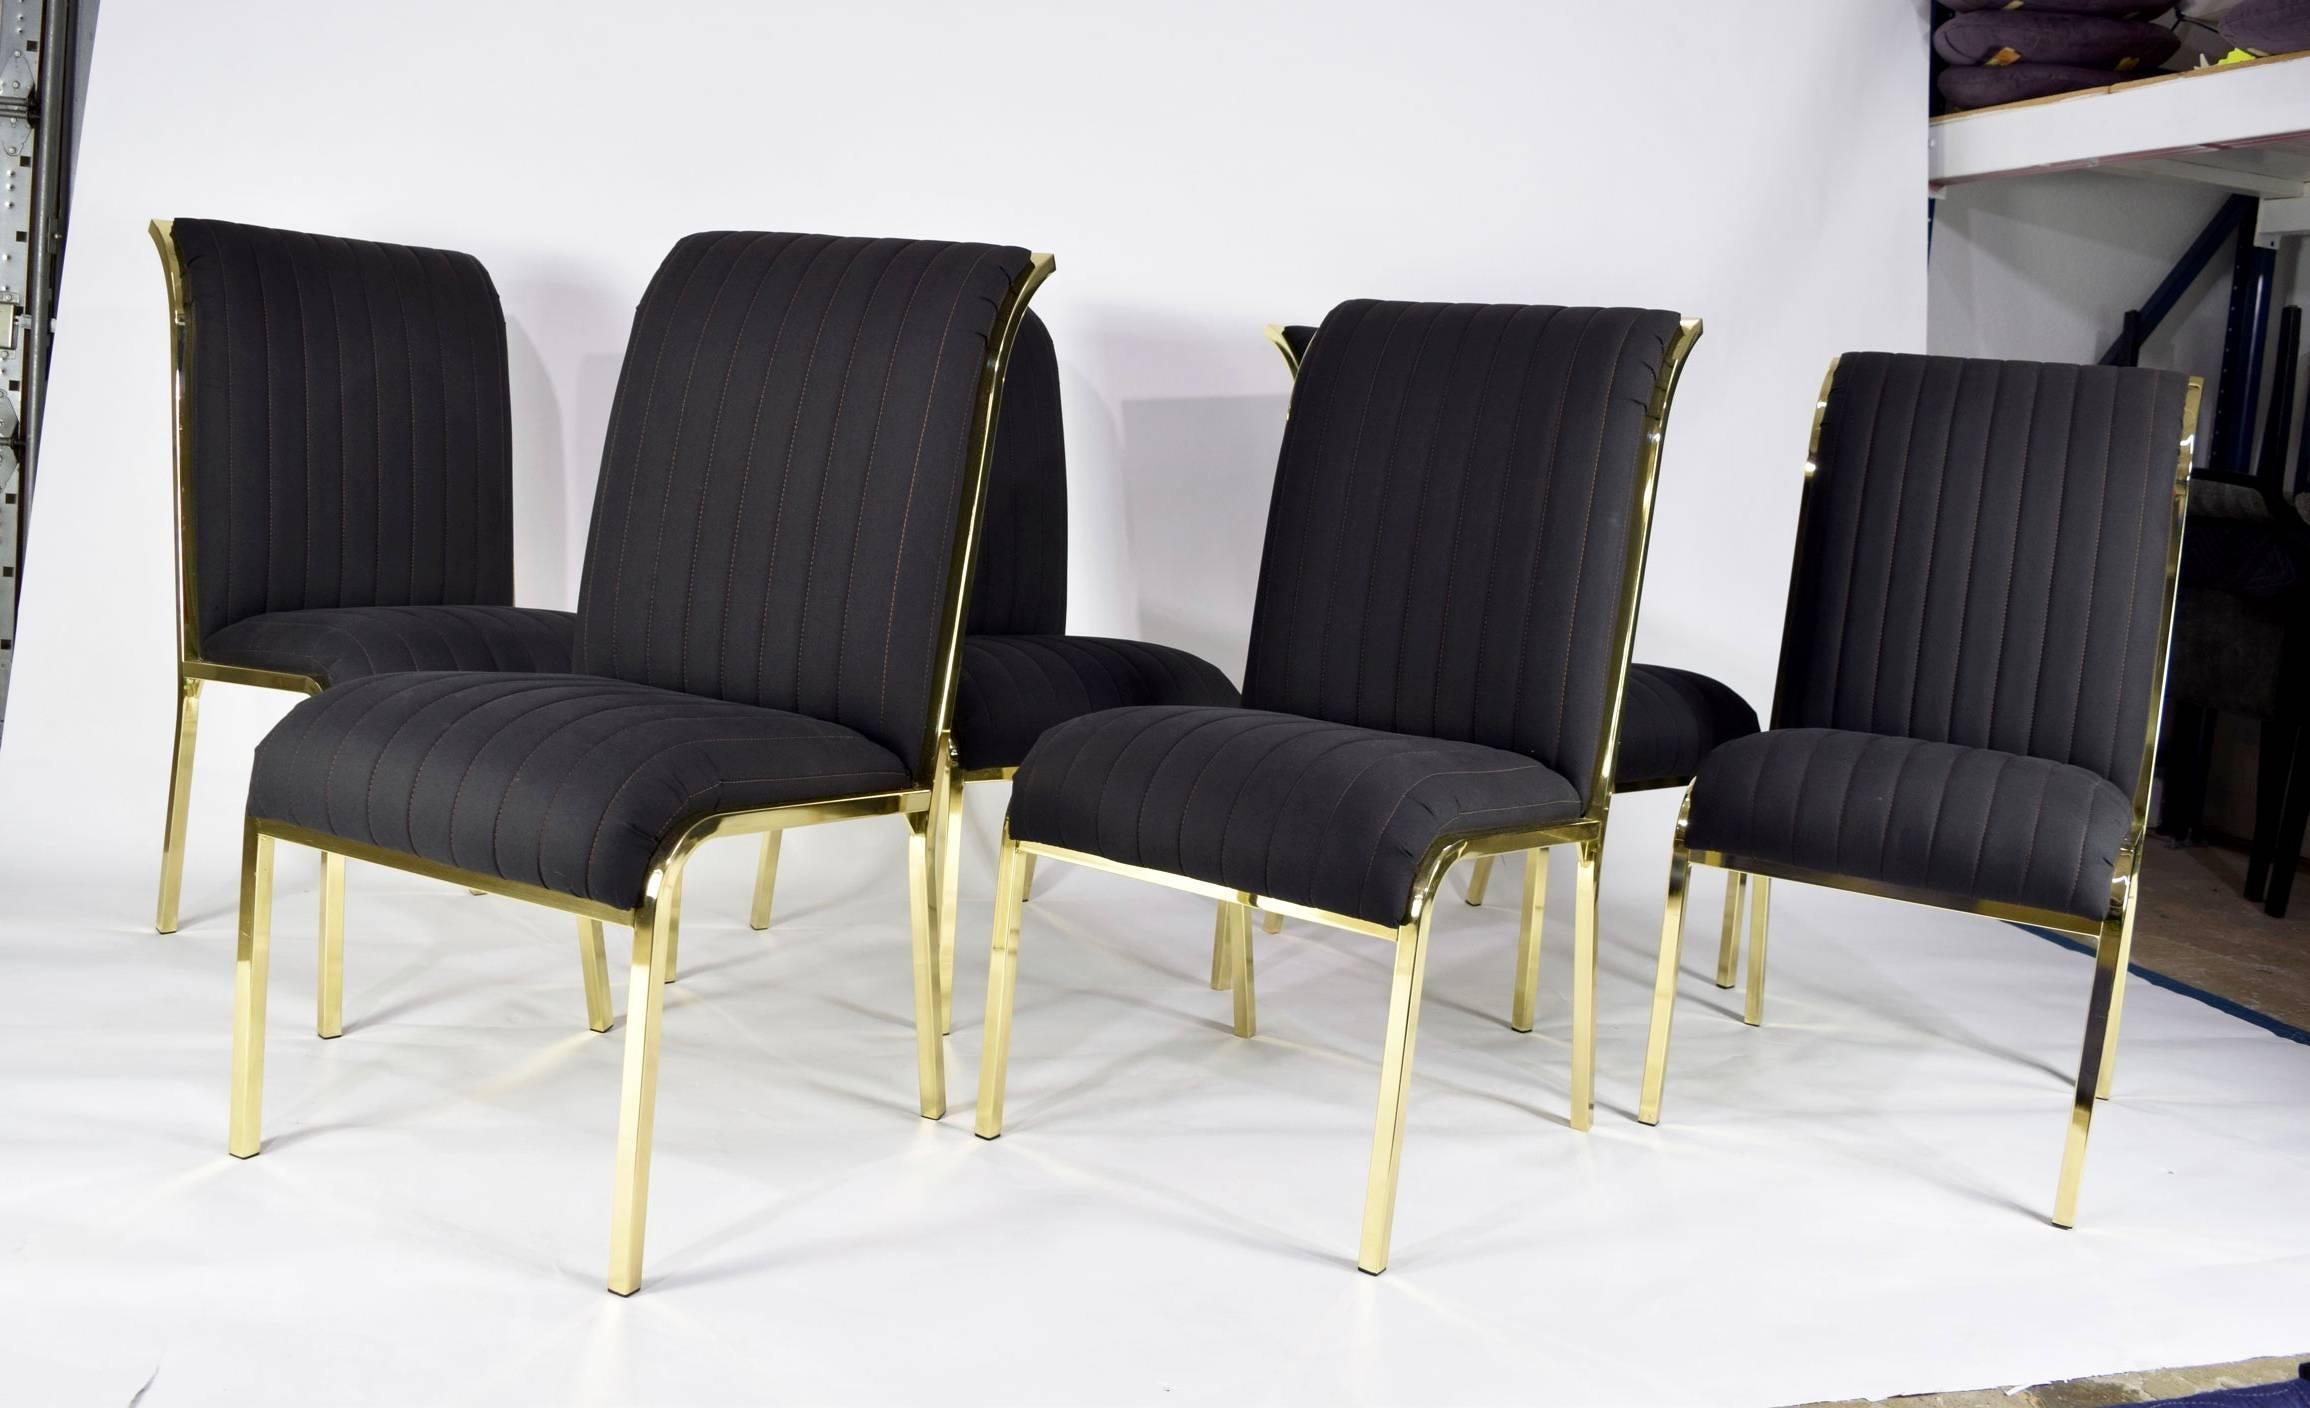 This is a beautiful set of six dining chairs by DIA. The chairs have a brass finish frame which is in excellent condition. The fabric is a black/grey which is beautiful but of course the chairs can be reupholstered if desired. We are happy to help